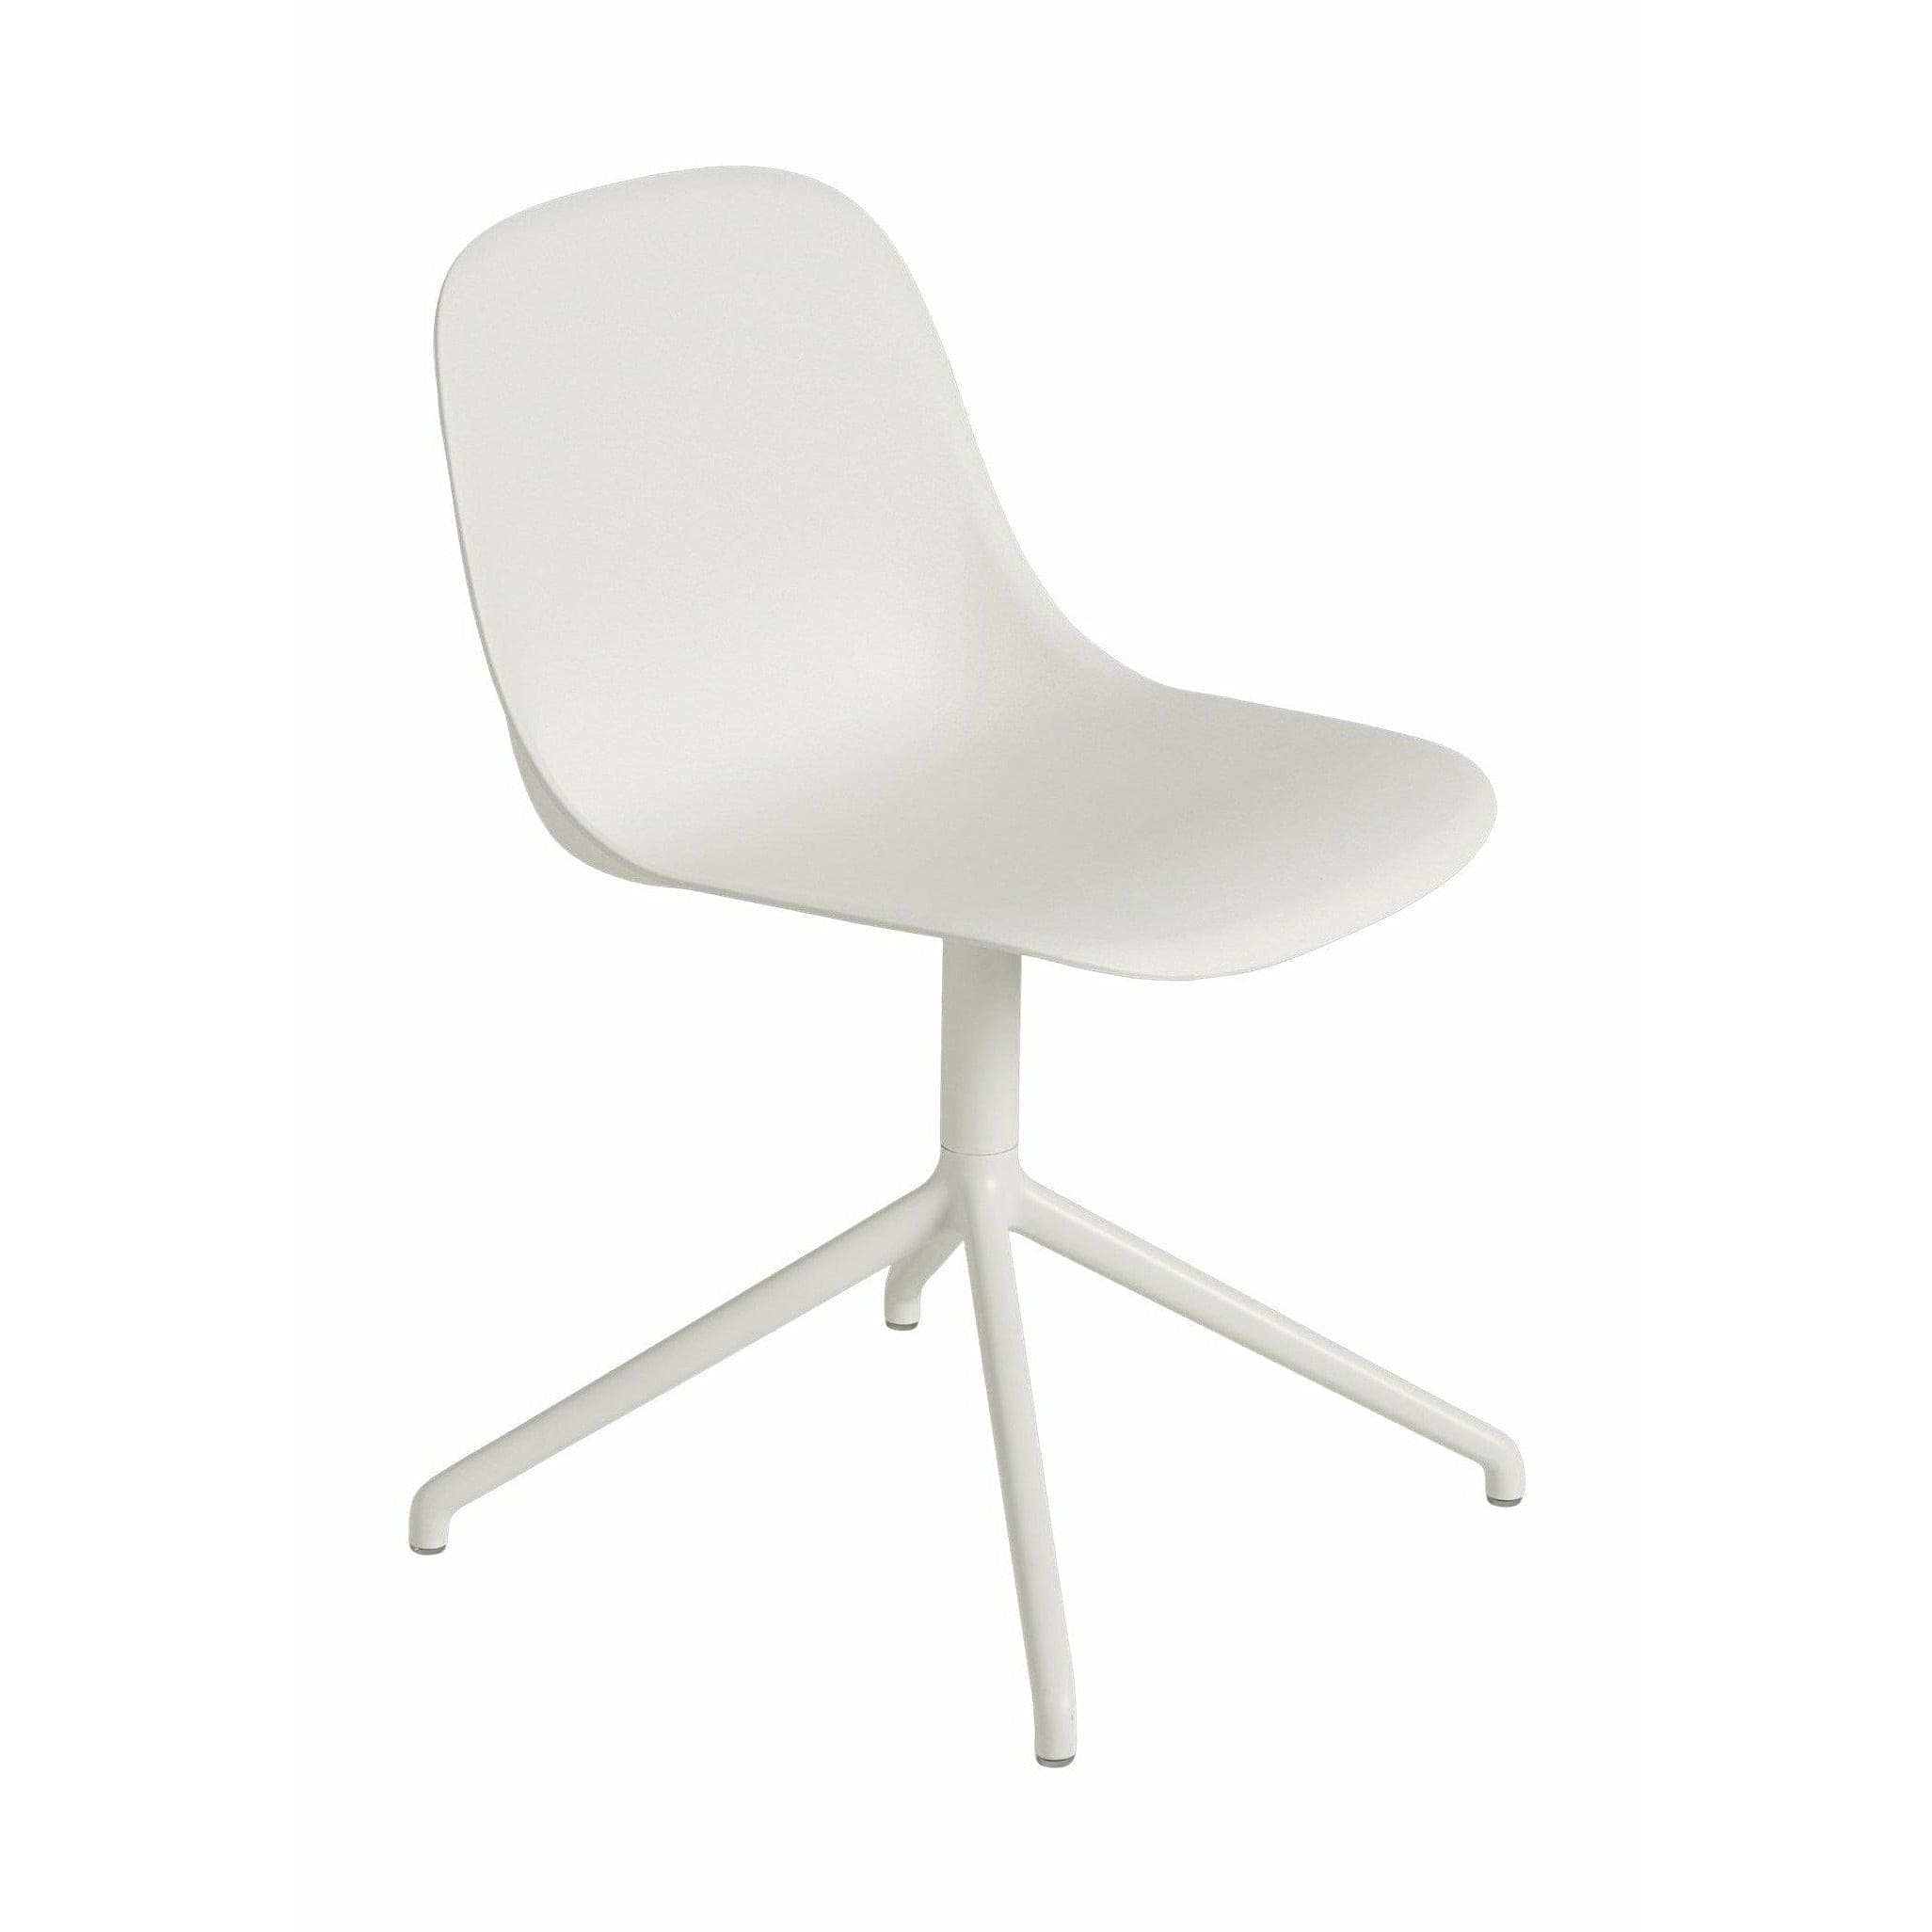 Muuto Fiber Side Chair Made Of Recycled Plastic Swivel, Natural White/White